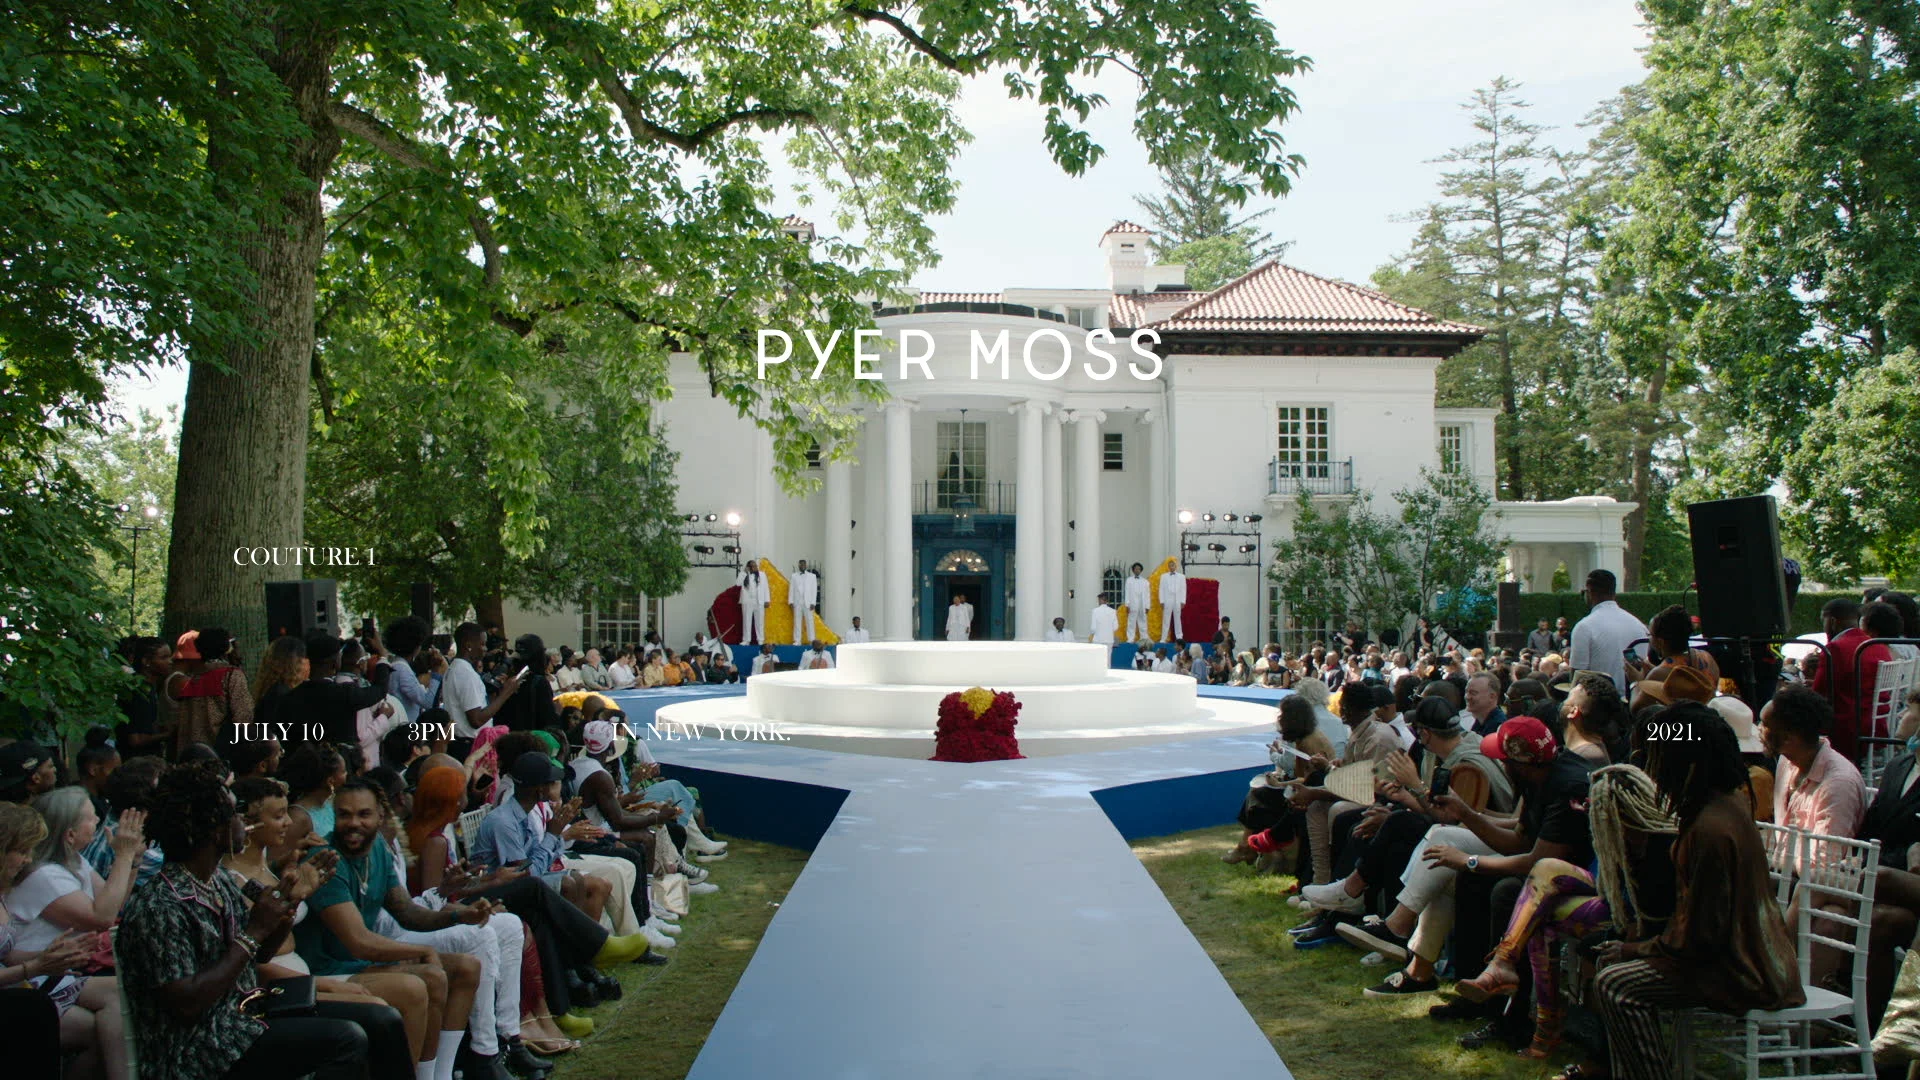 Couture 1 – Pyer Moss